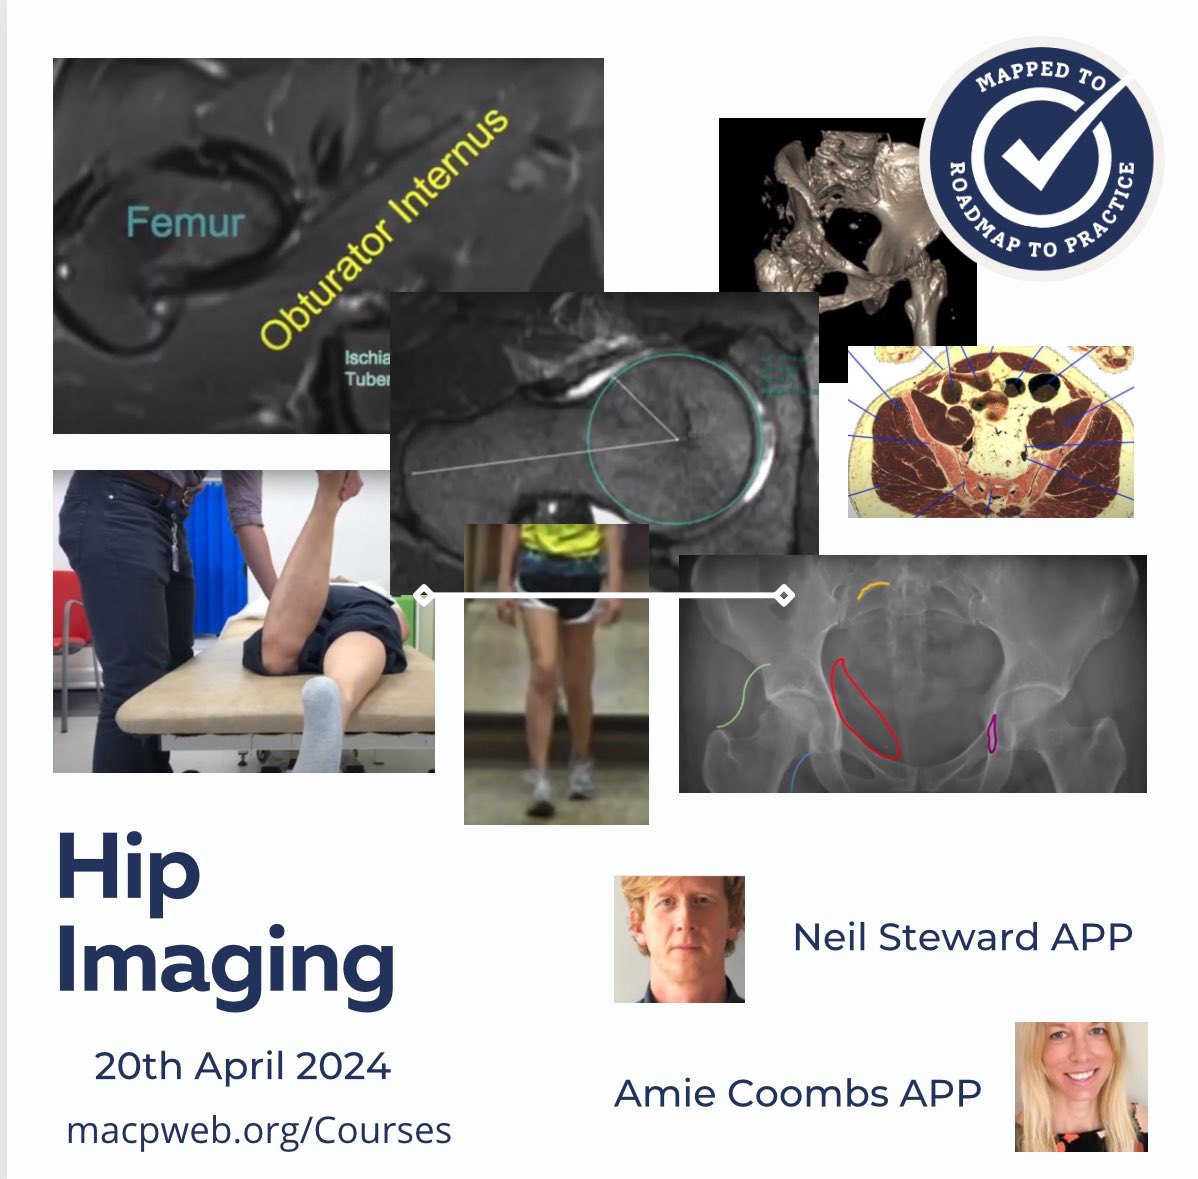 This fantastic 1 day online hip imaging course is back by popular demand with @neilstewart101 and @AmieCoombs2 book here now to secure your space! macpweb.org/events/284/int…